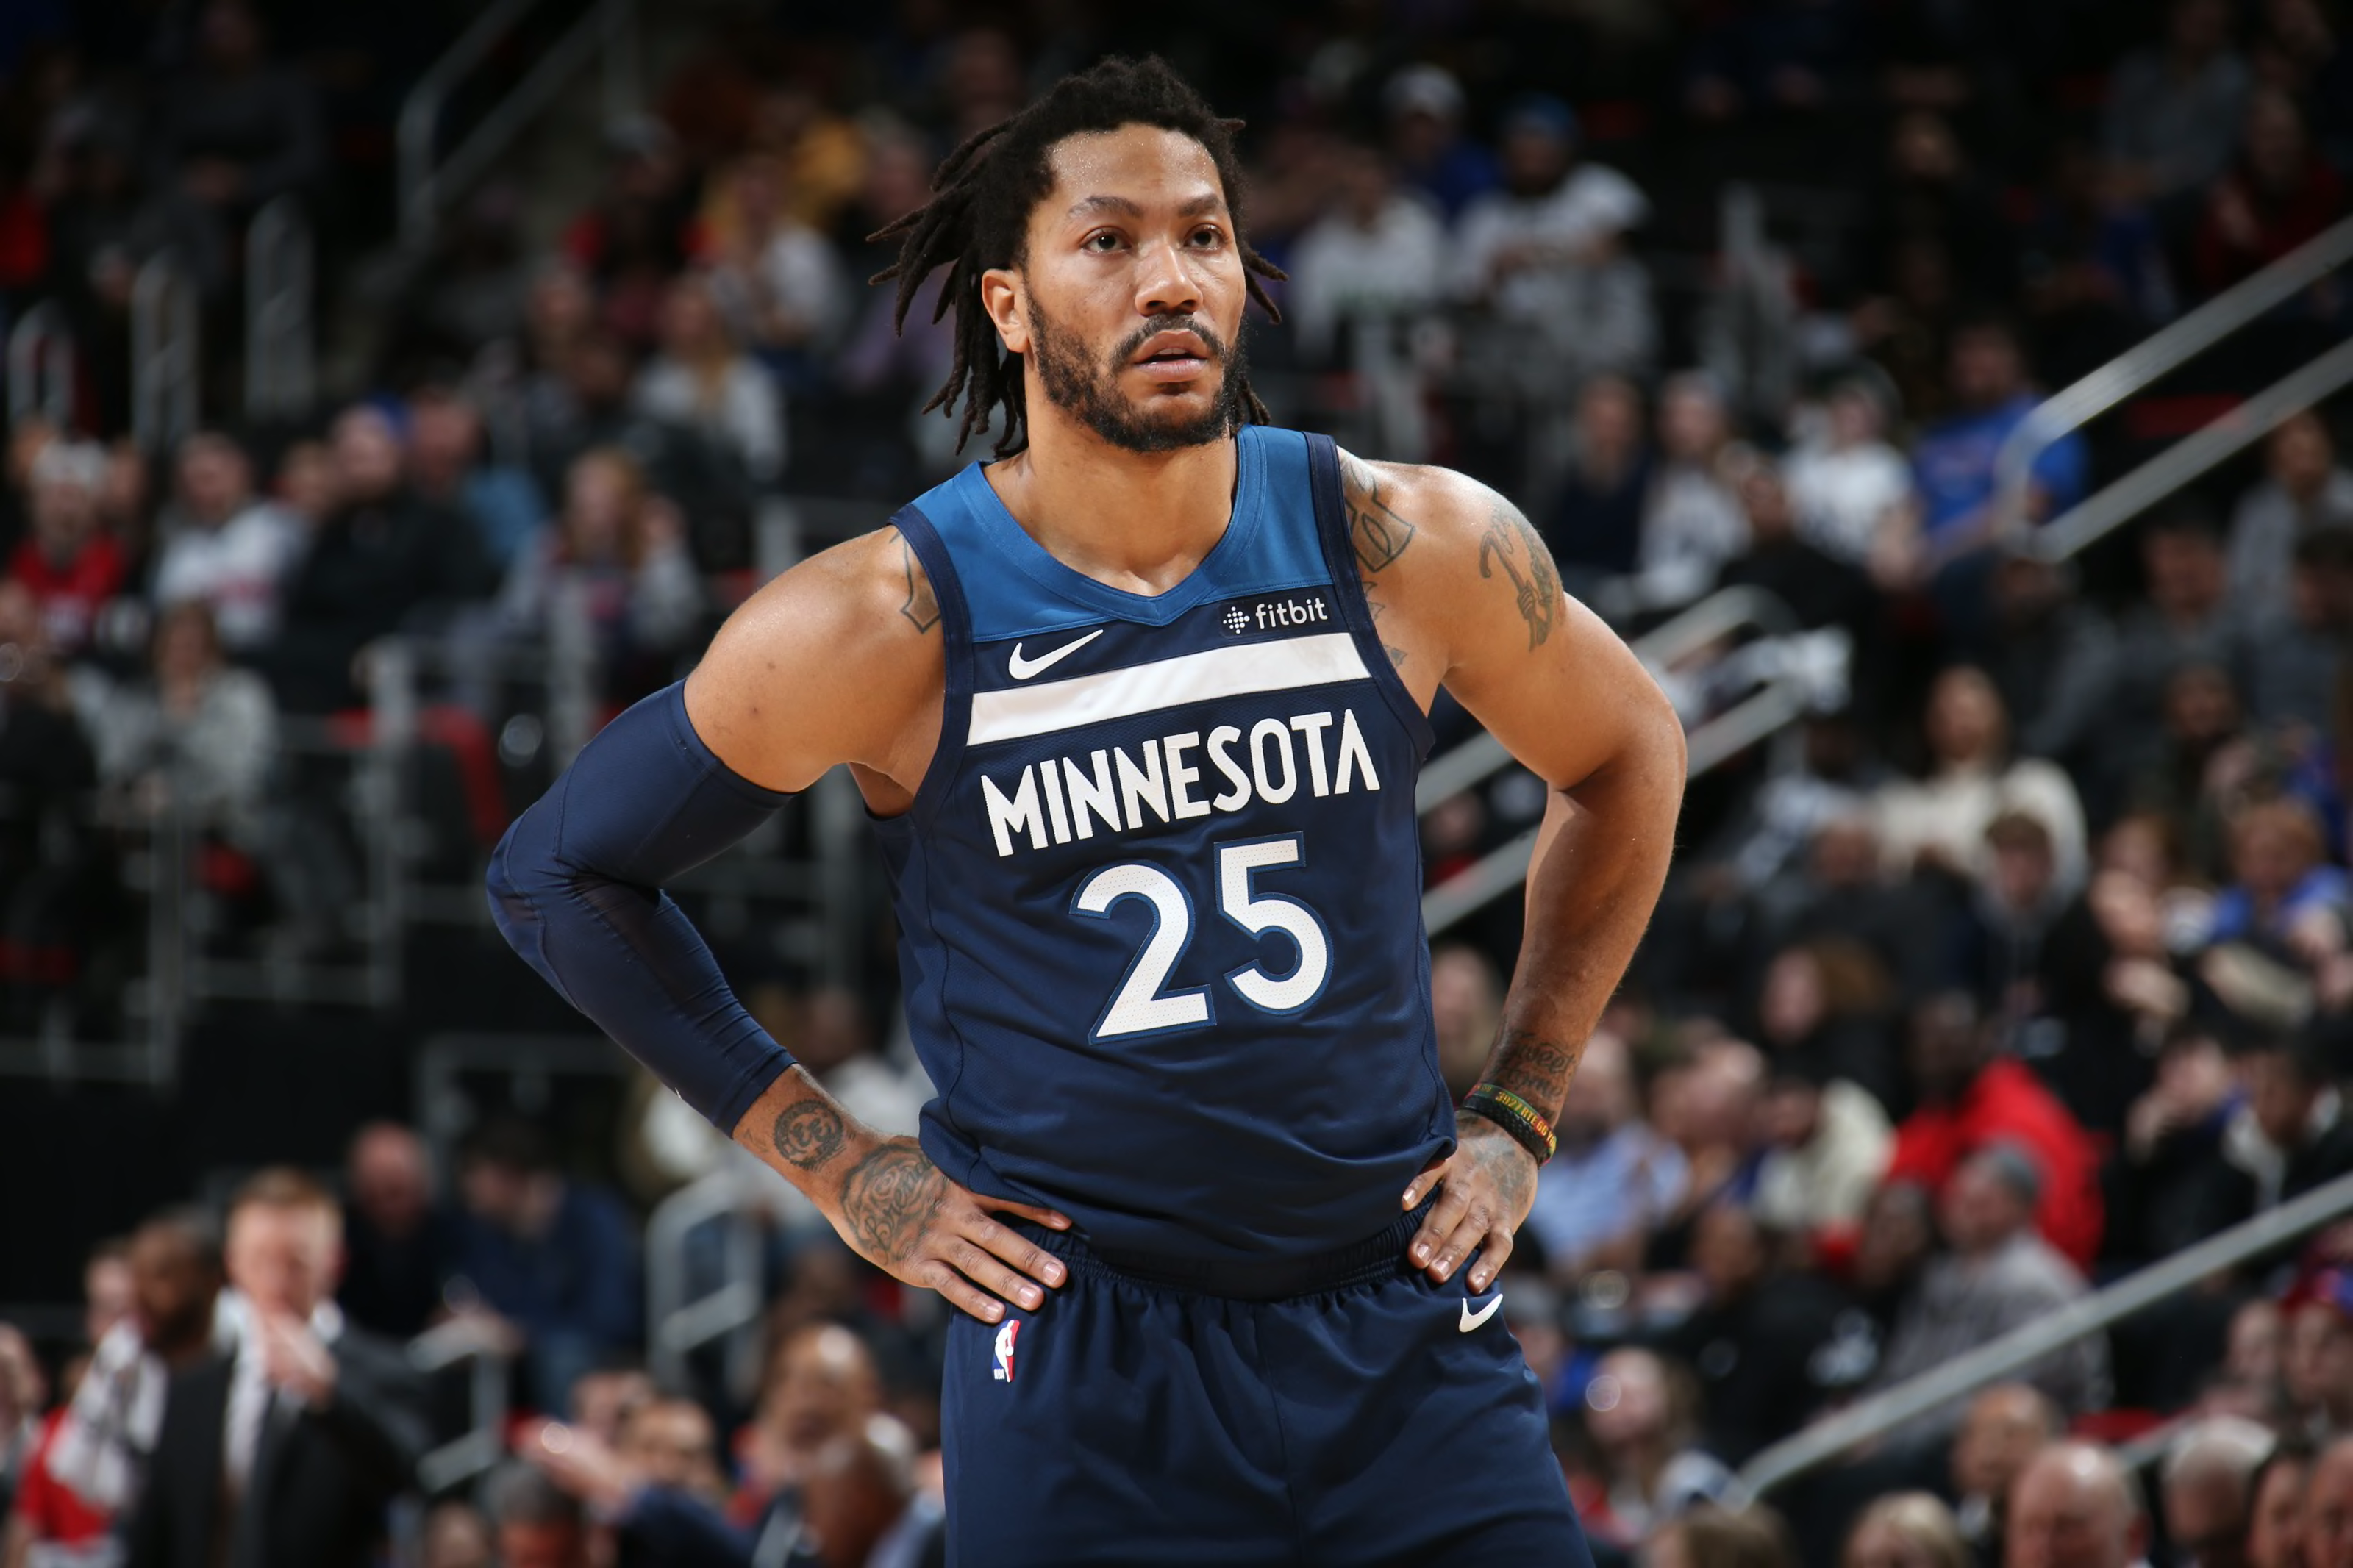 Derrick Rose / Derrick Rose Says He 'Kind of Got PTSD' While Growing Up ... / Derrick martell rose (born october 4, 1988) is an american professional basketball player for the new york knicks of the national basketball association (nba).